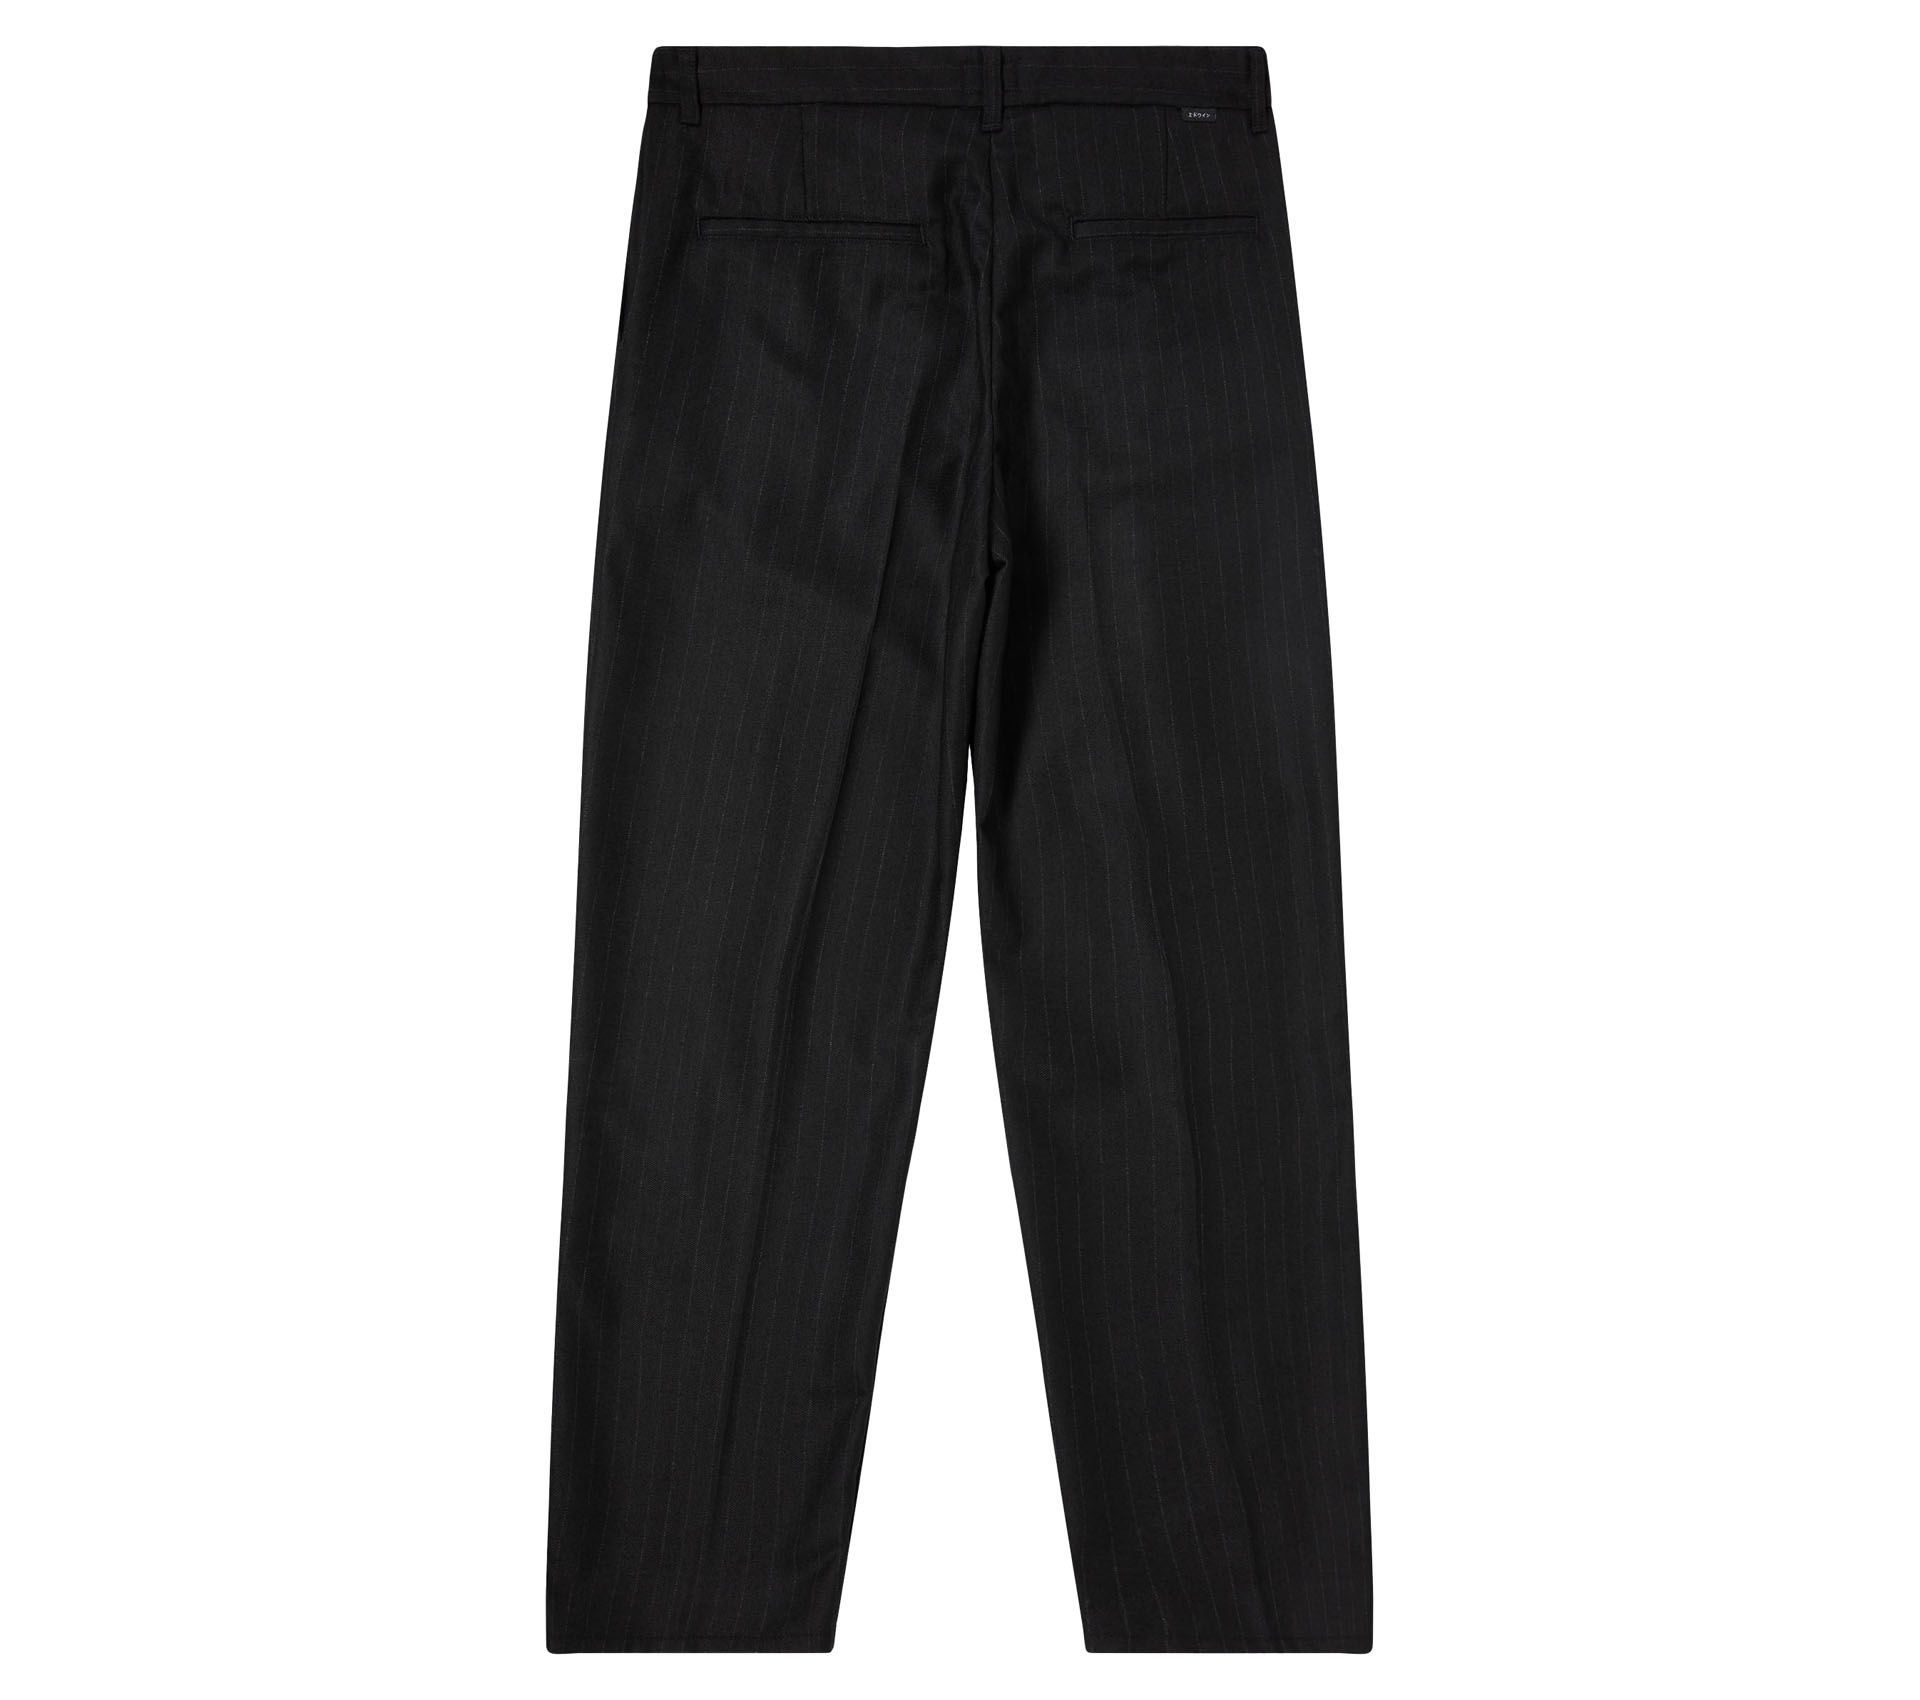 Image #1 of ZIG PANT PIN STRIPED